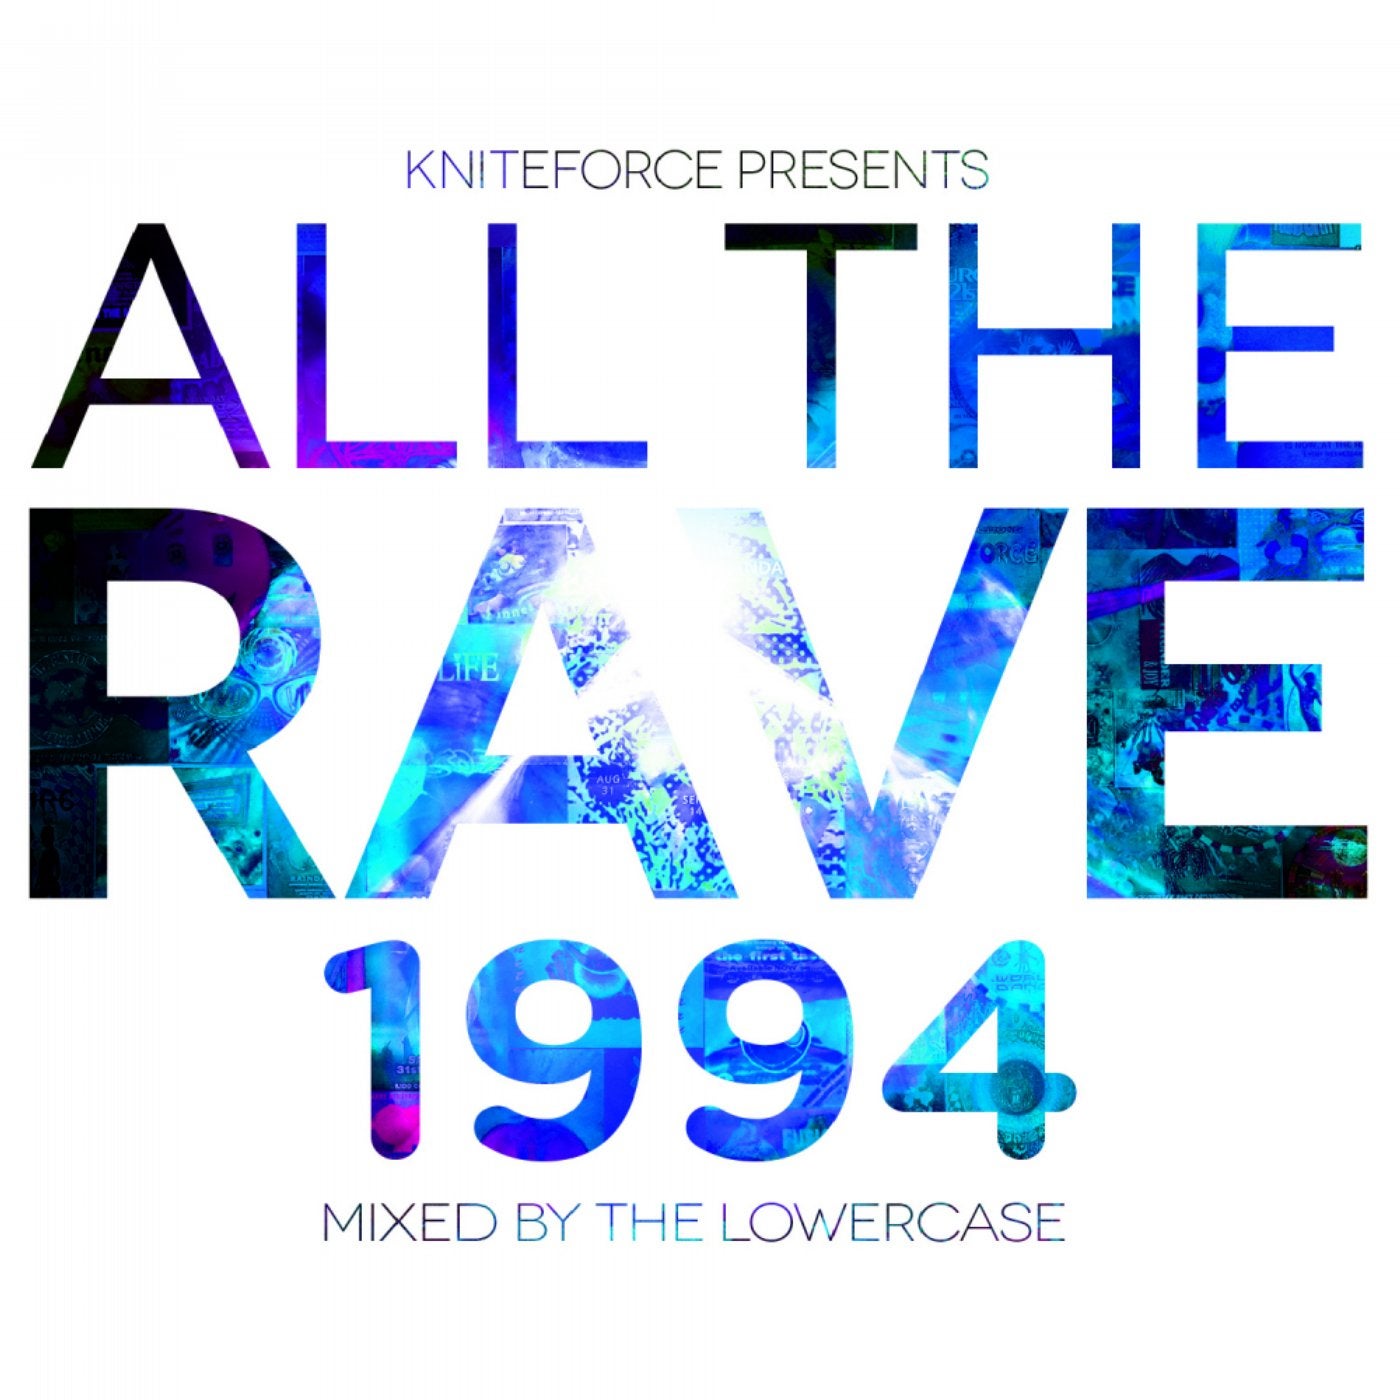 All The Rave 1994